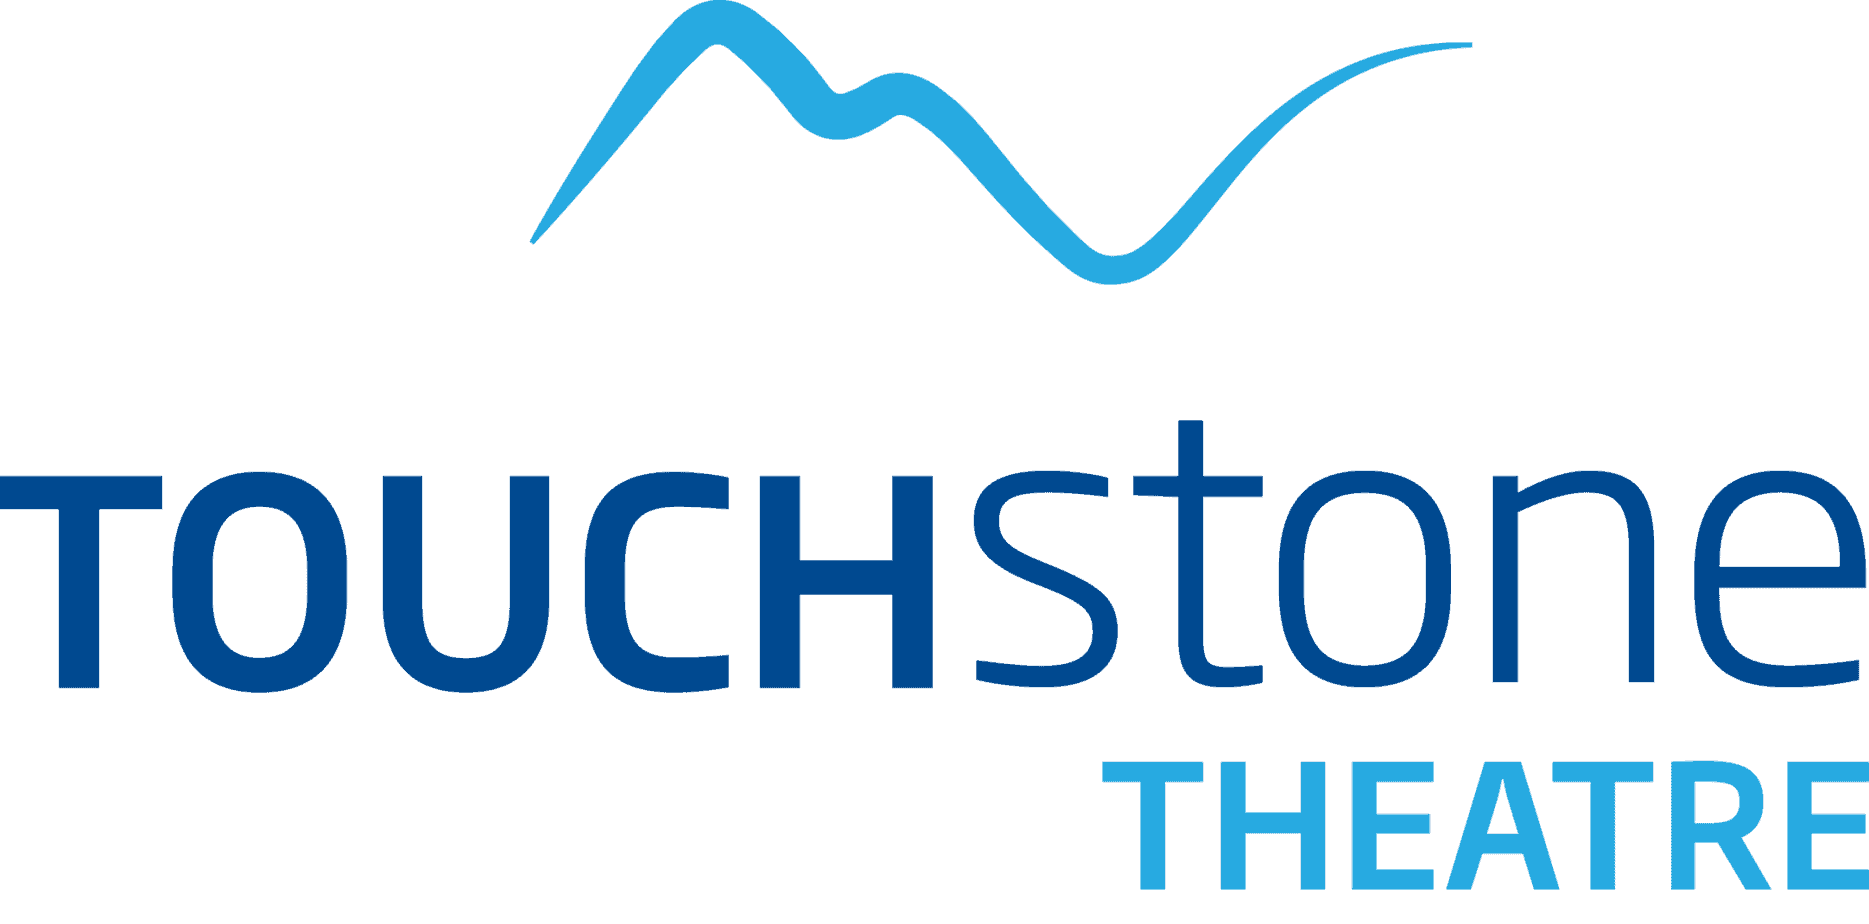 Touchstone Theatre logo - a light blue outline of a mountain up top, and the wordmark TOUCHstone THEATRE below, the word stone in lowercase and the rest uppercase.